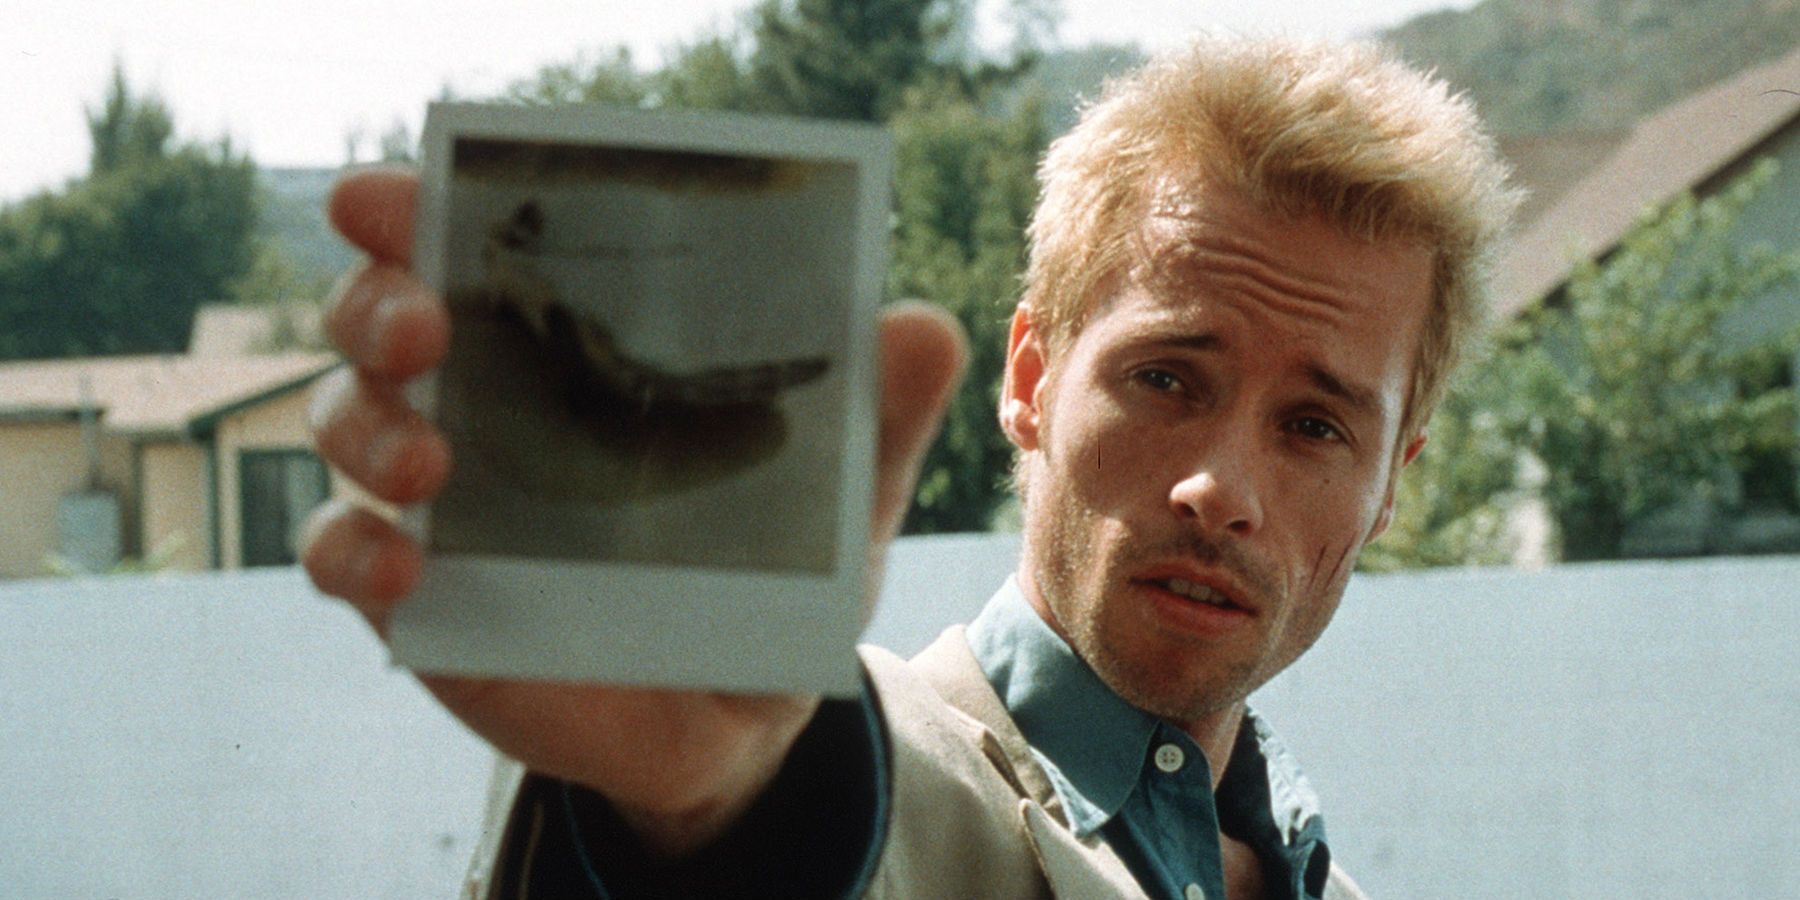 Guy Pearce in Memento by Christopher Nolan